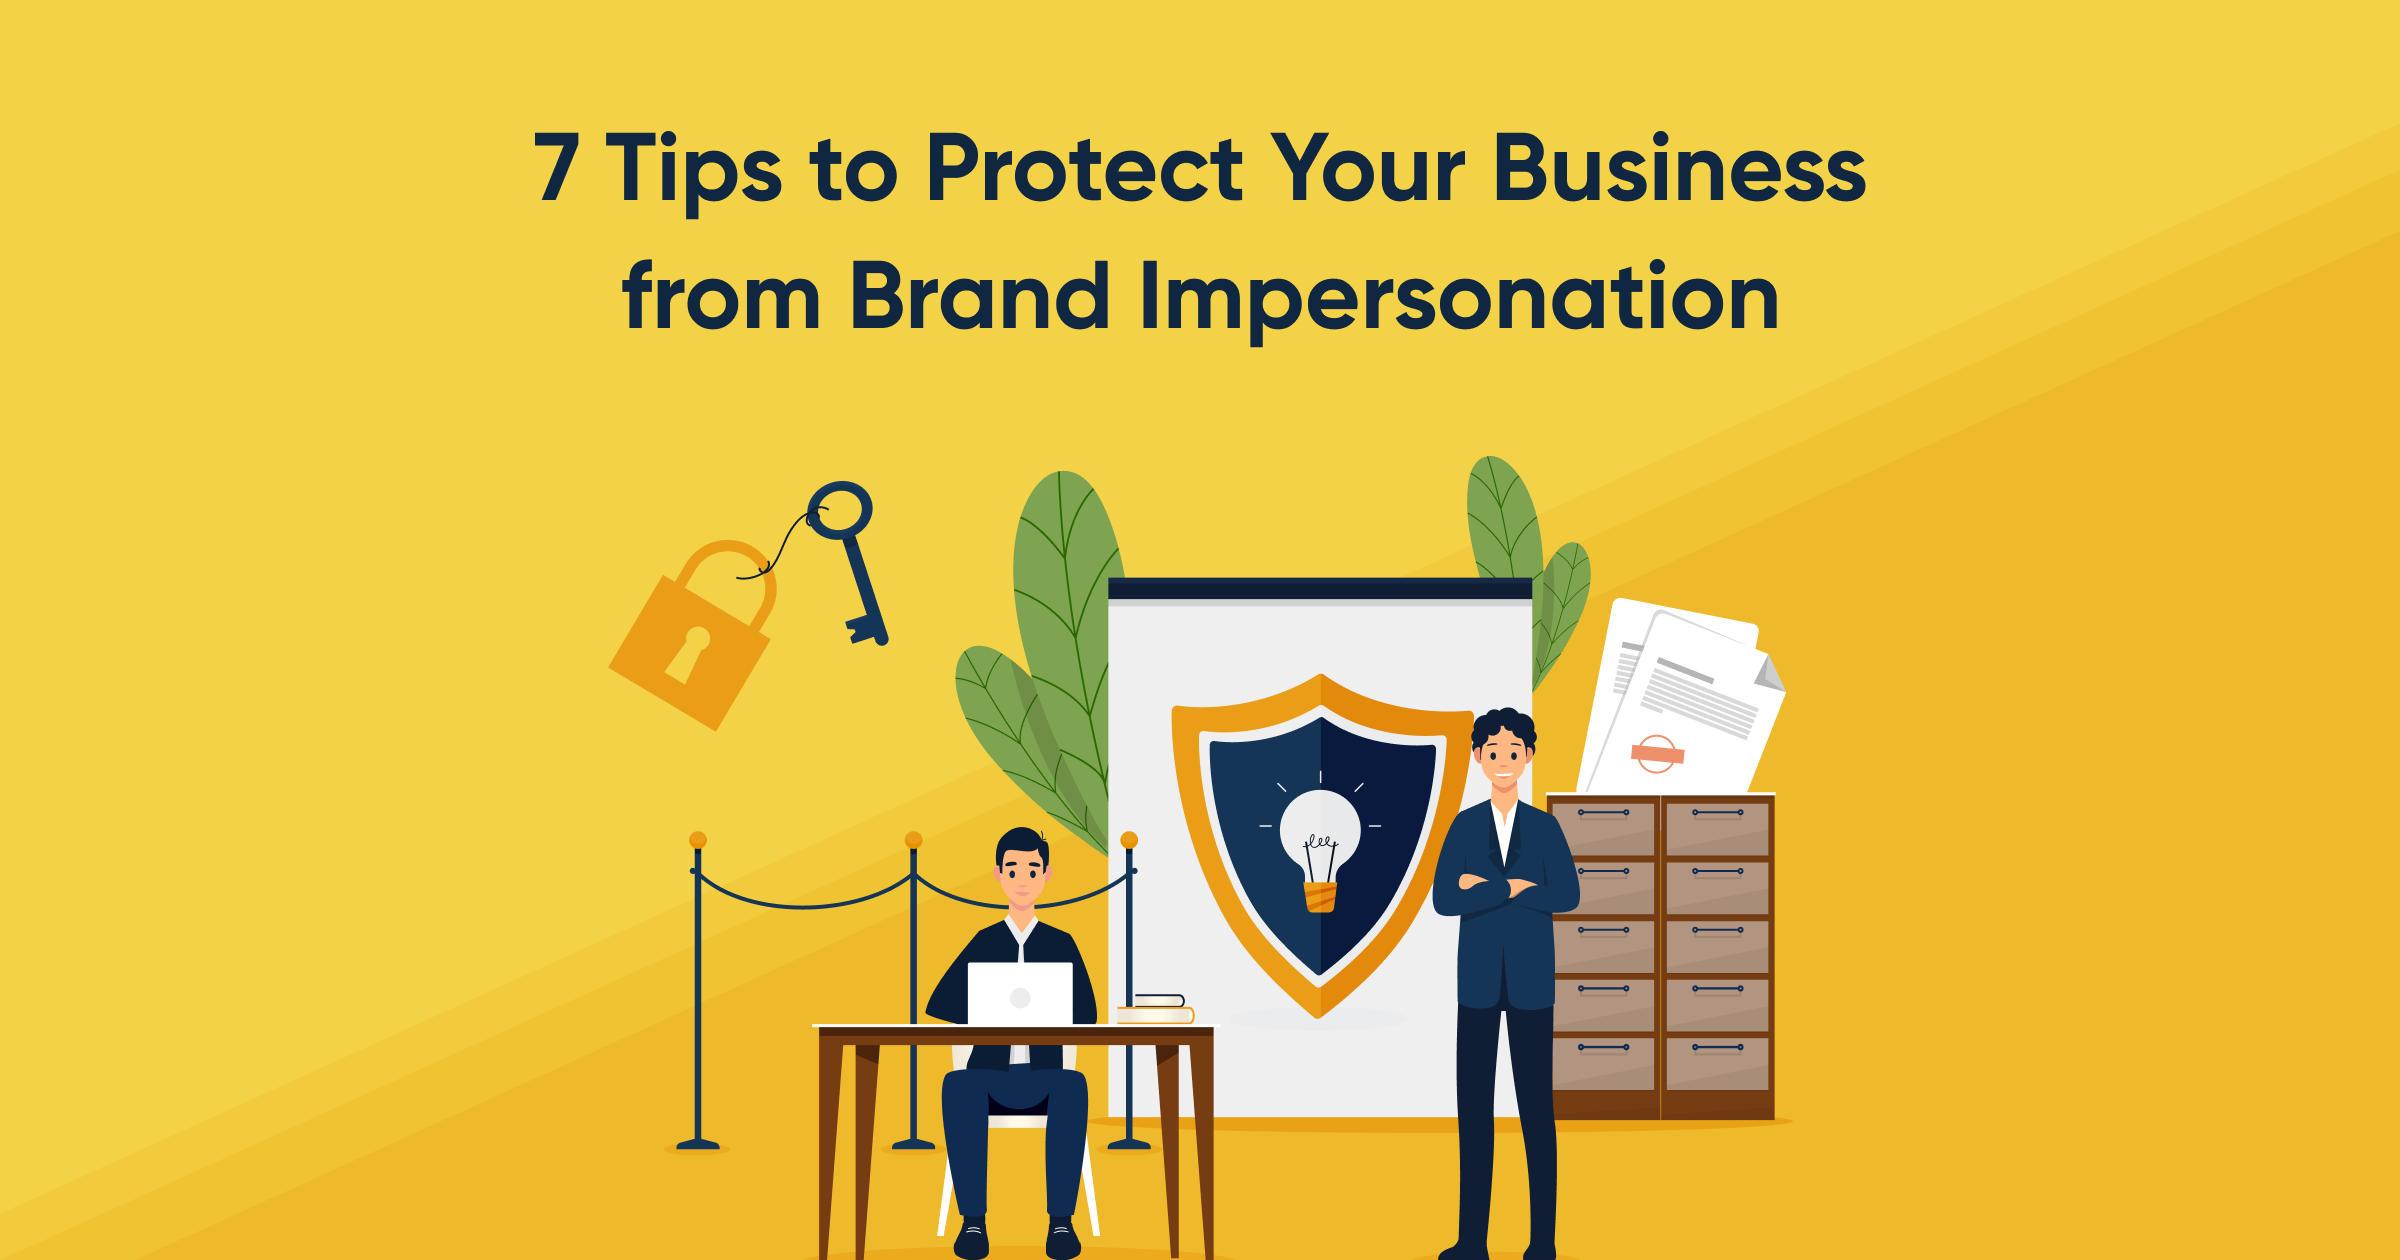 7 Tips to Protect Your Business from Brand Impersonation